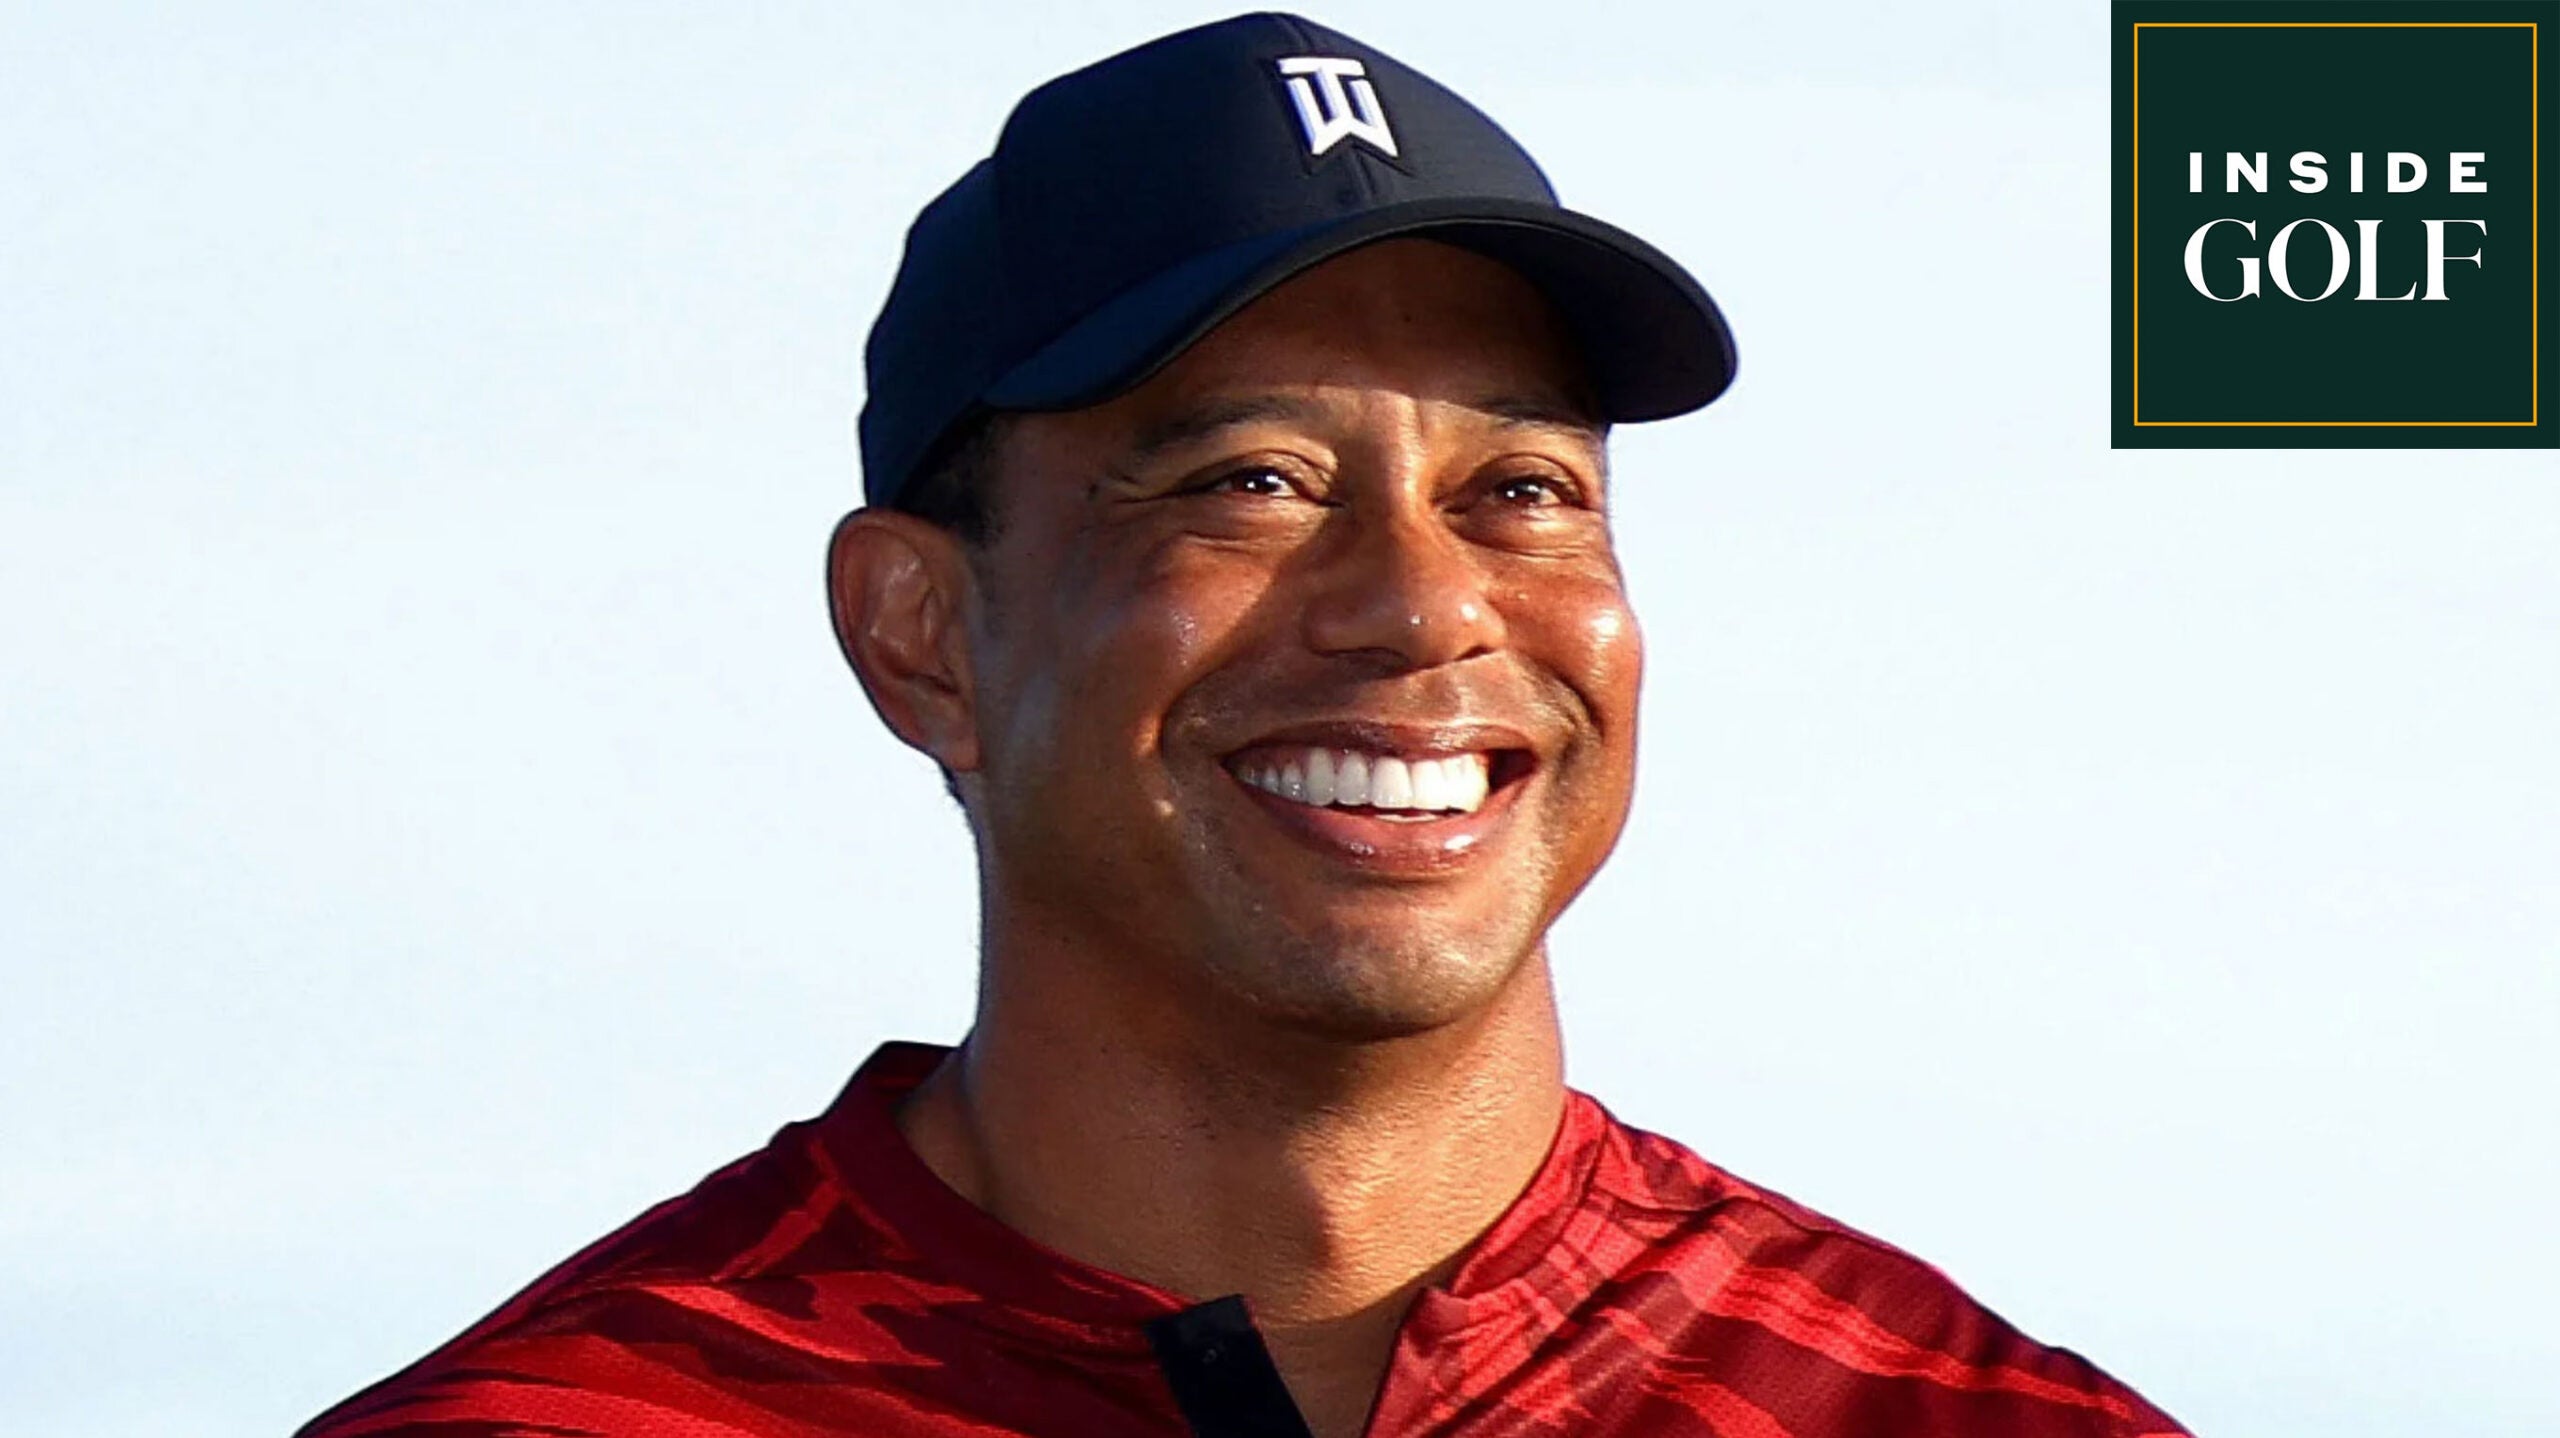 Tiger Woods is ready. Are you?